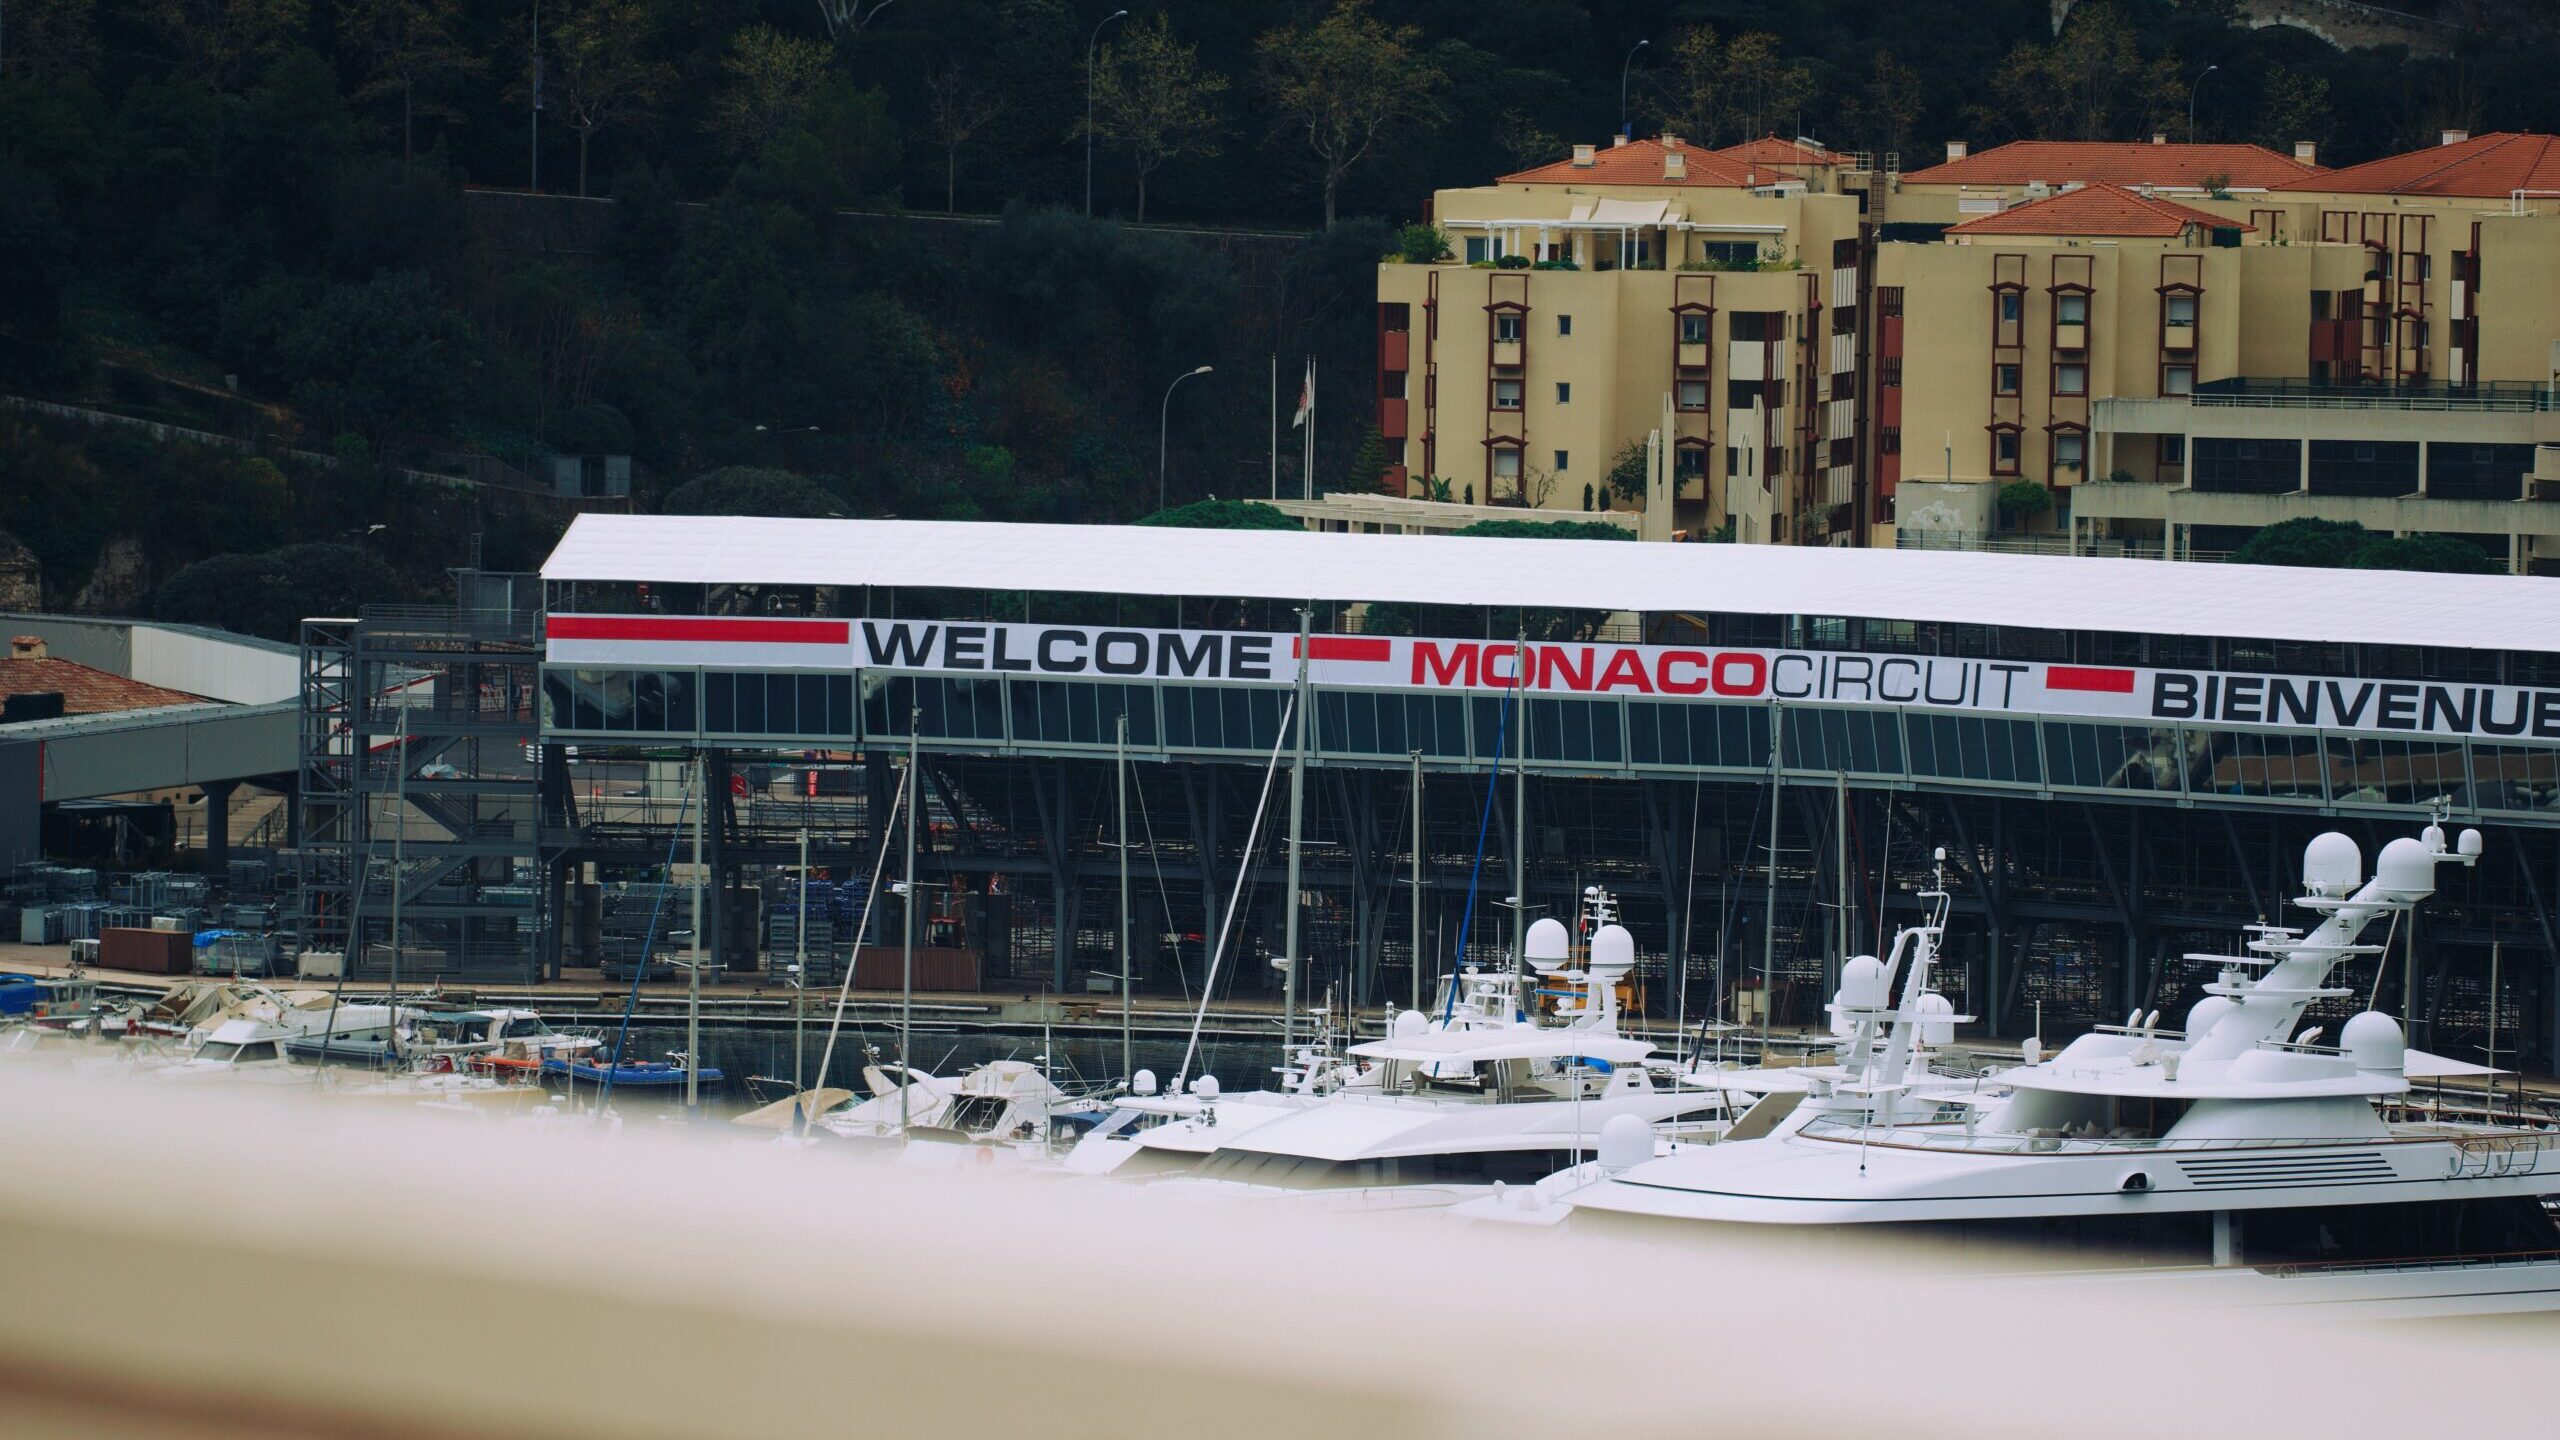 Boats in front of "Welcome Monaco Circuit Bienvenue" sign